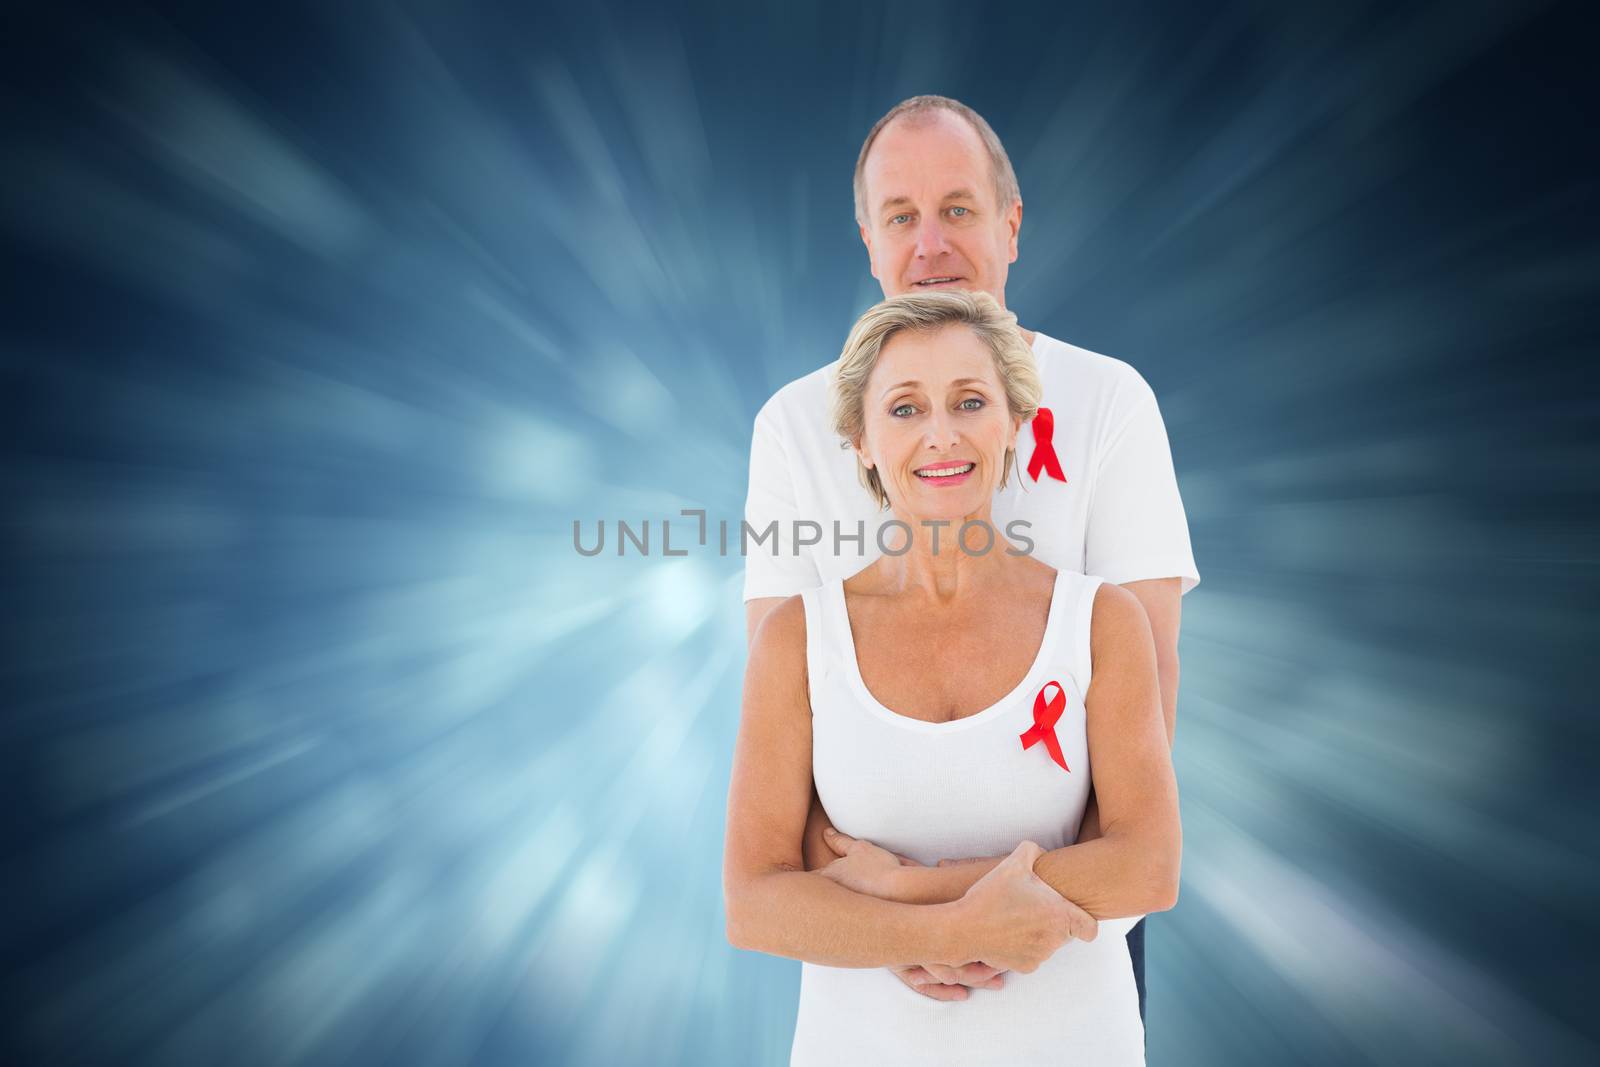 Mature couple supporting aids awareness together against blue abstract light spot design